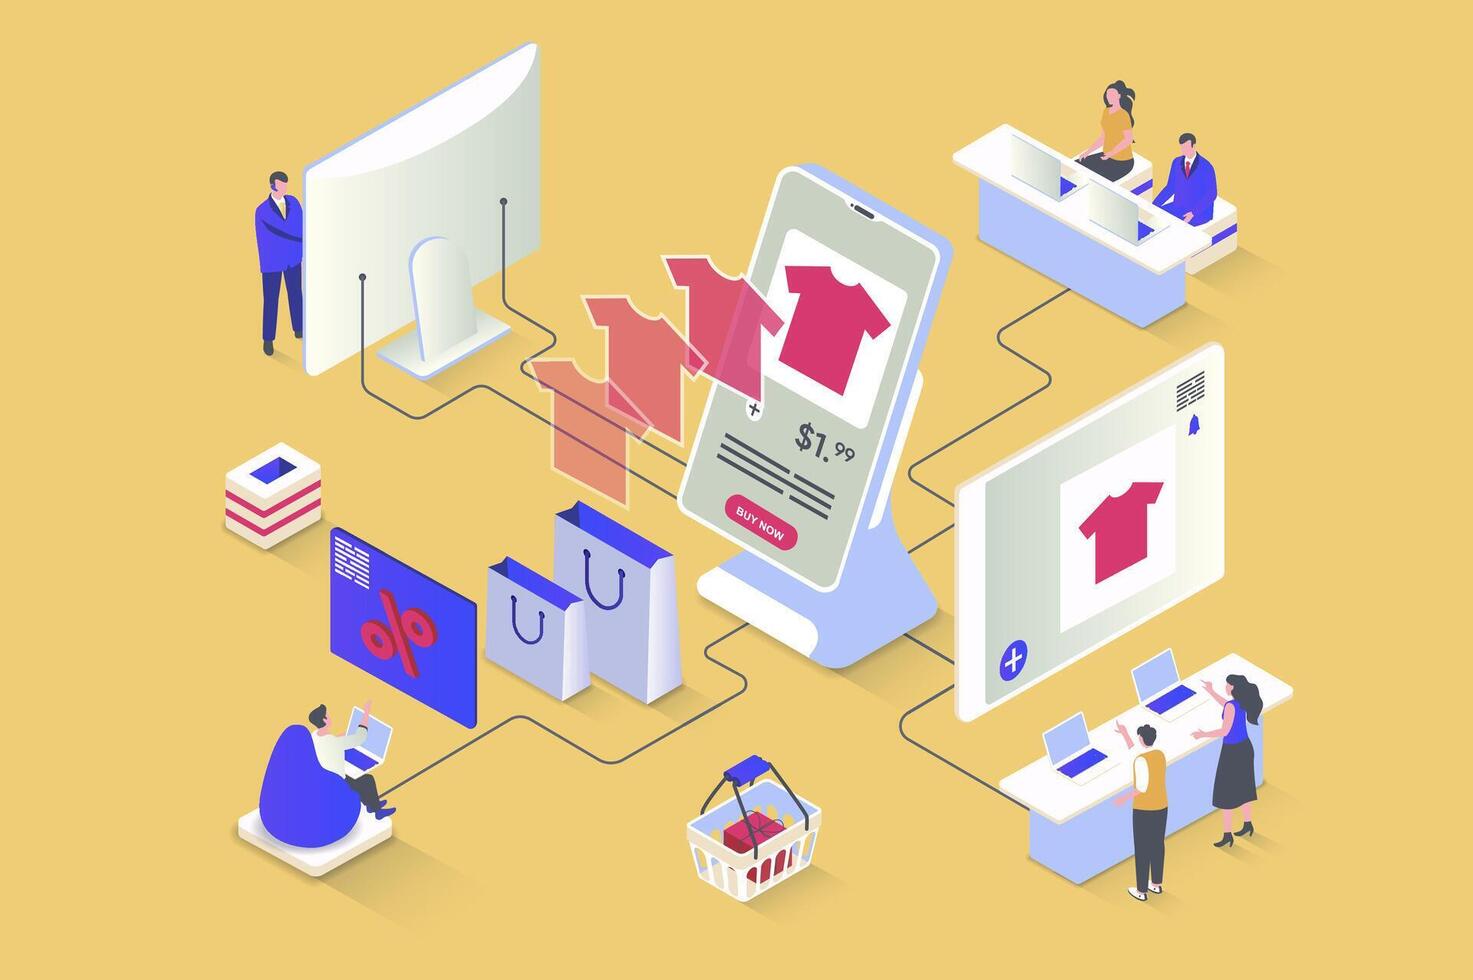 Online shopping concept in 3d isometric design. Buyers choose products with discount prices using mobile applications and store sites. Vector illustration with isometry people scene for web graphic